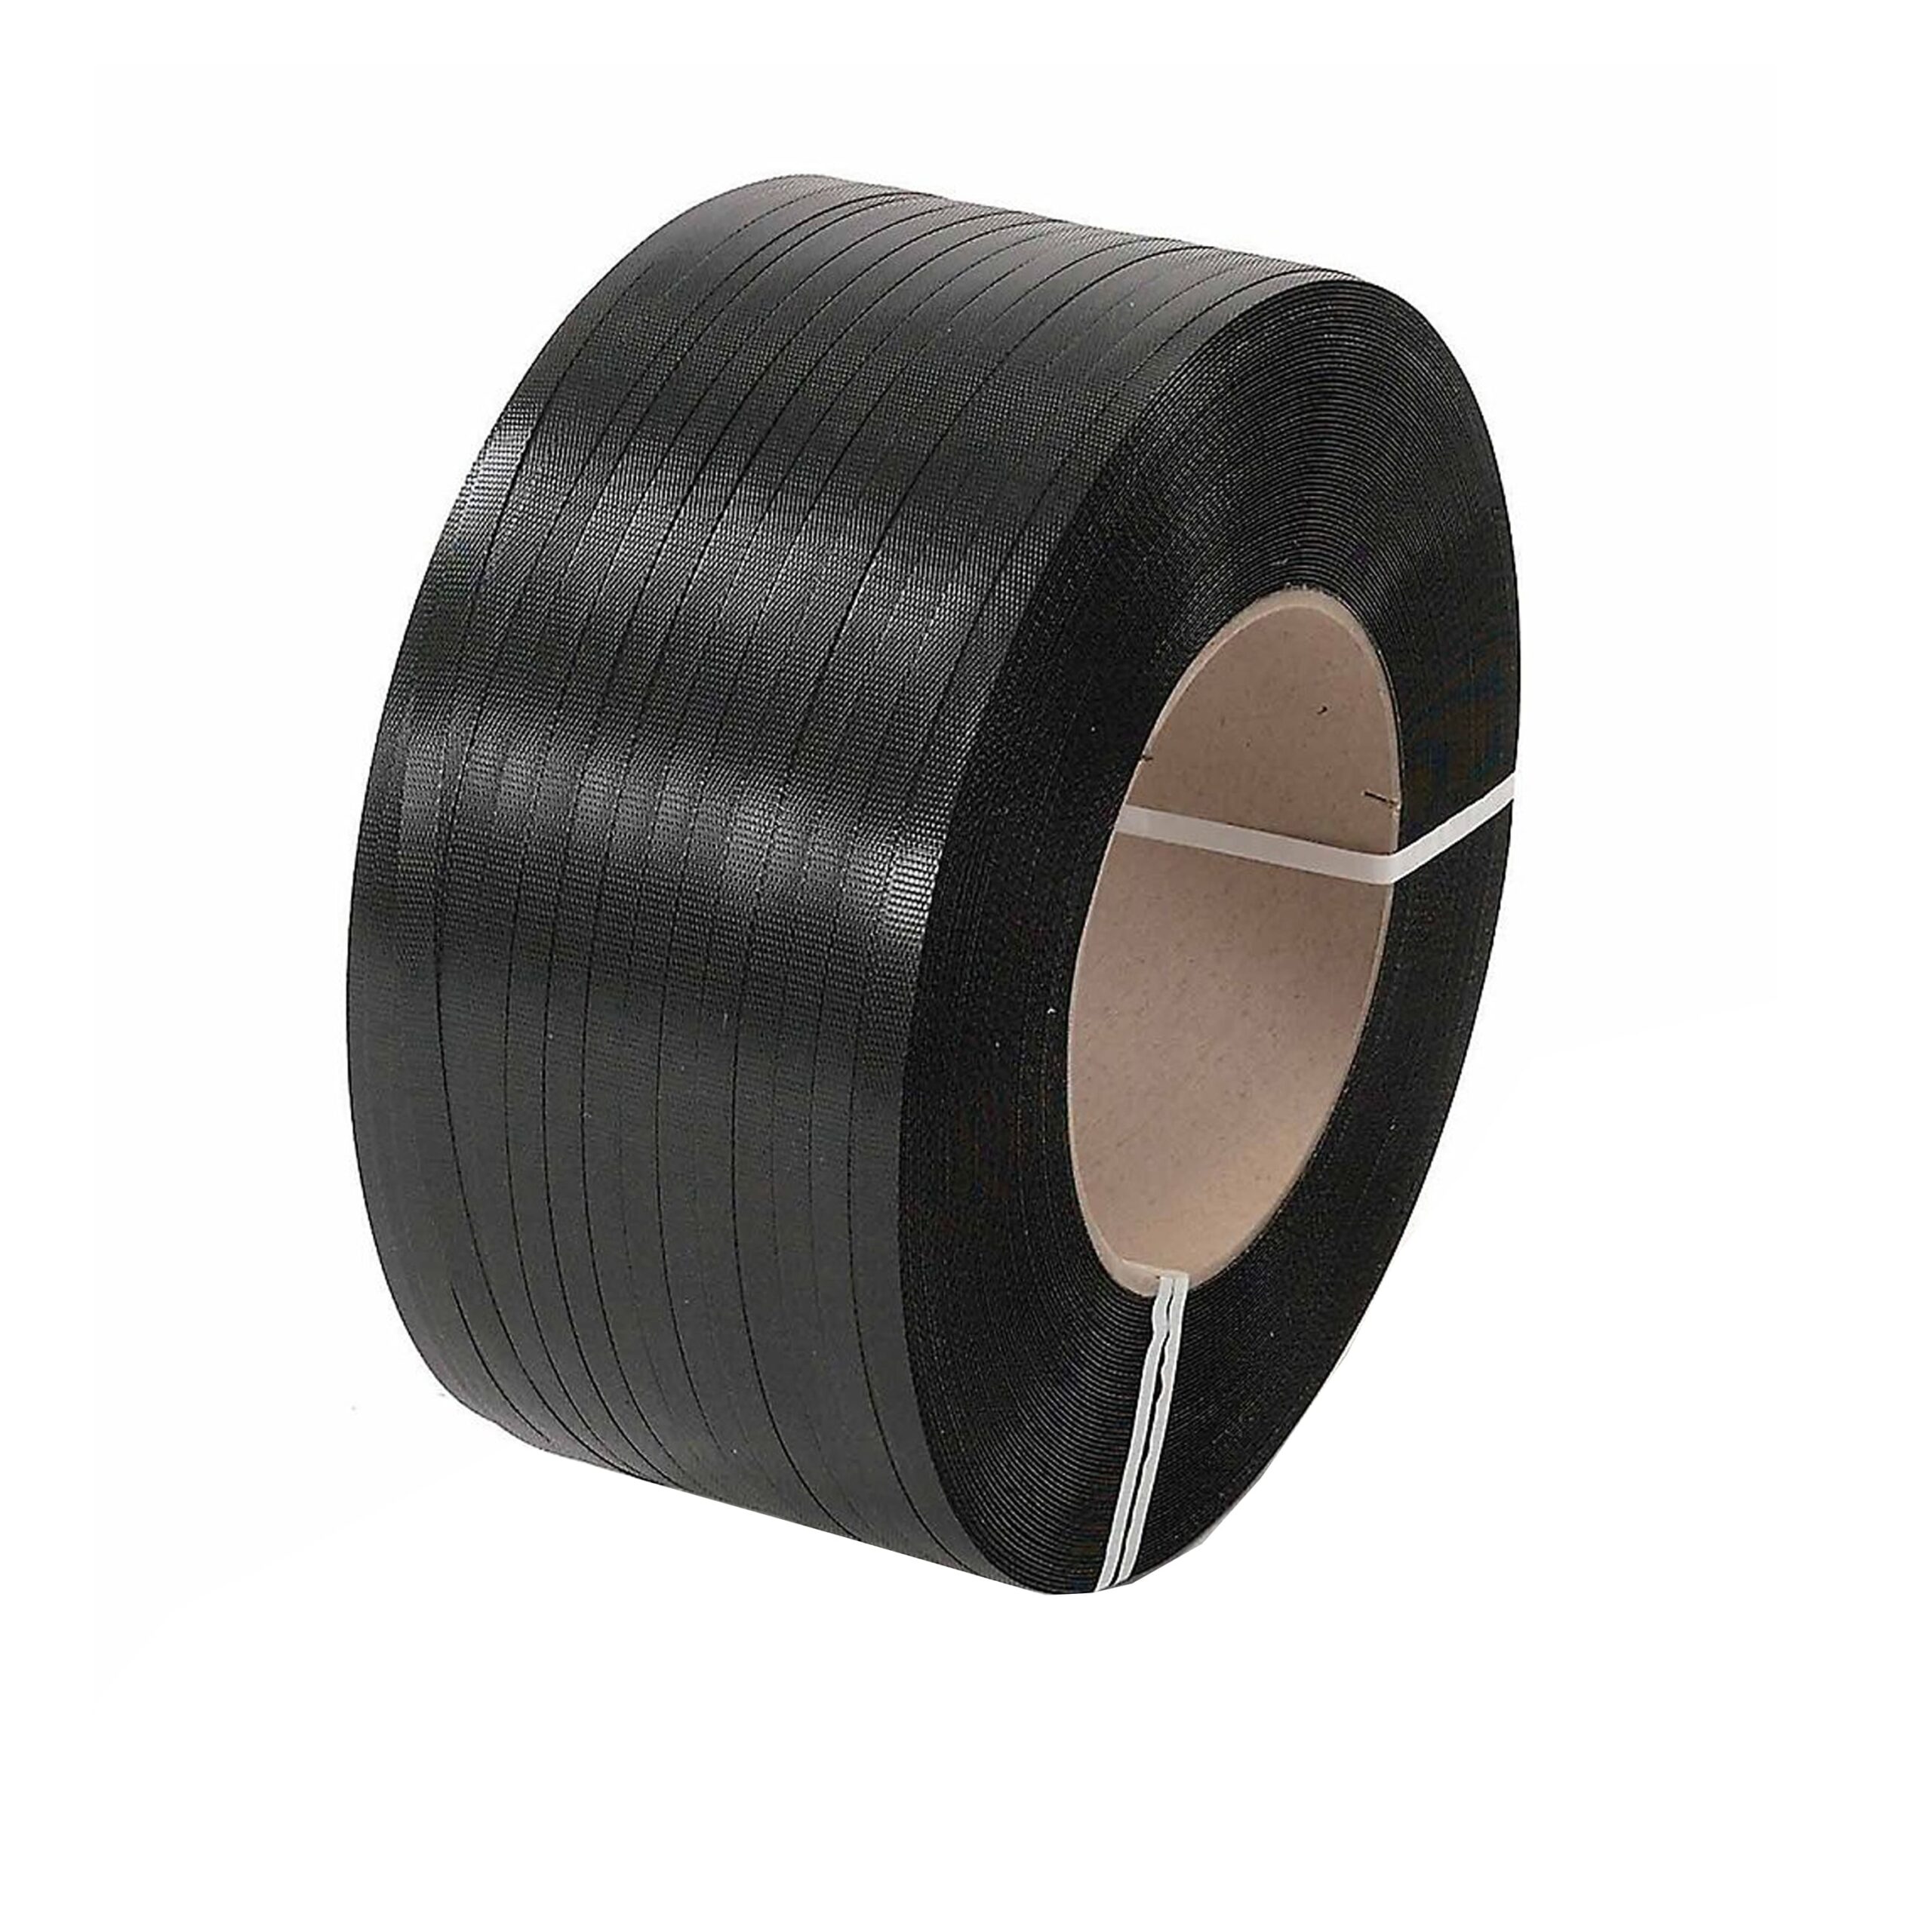 ROLL STRAPPING
BLACK 12mm x
1500m